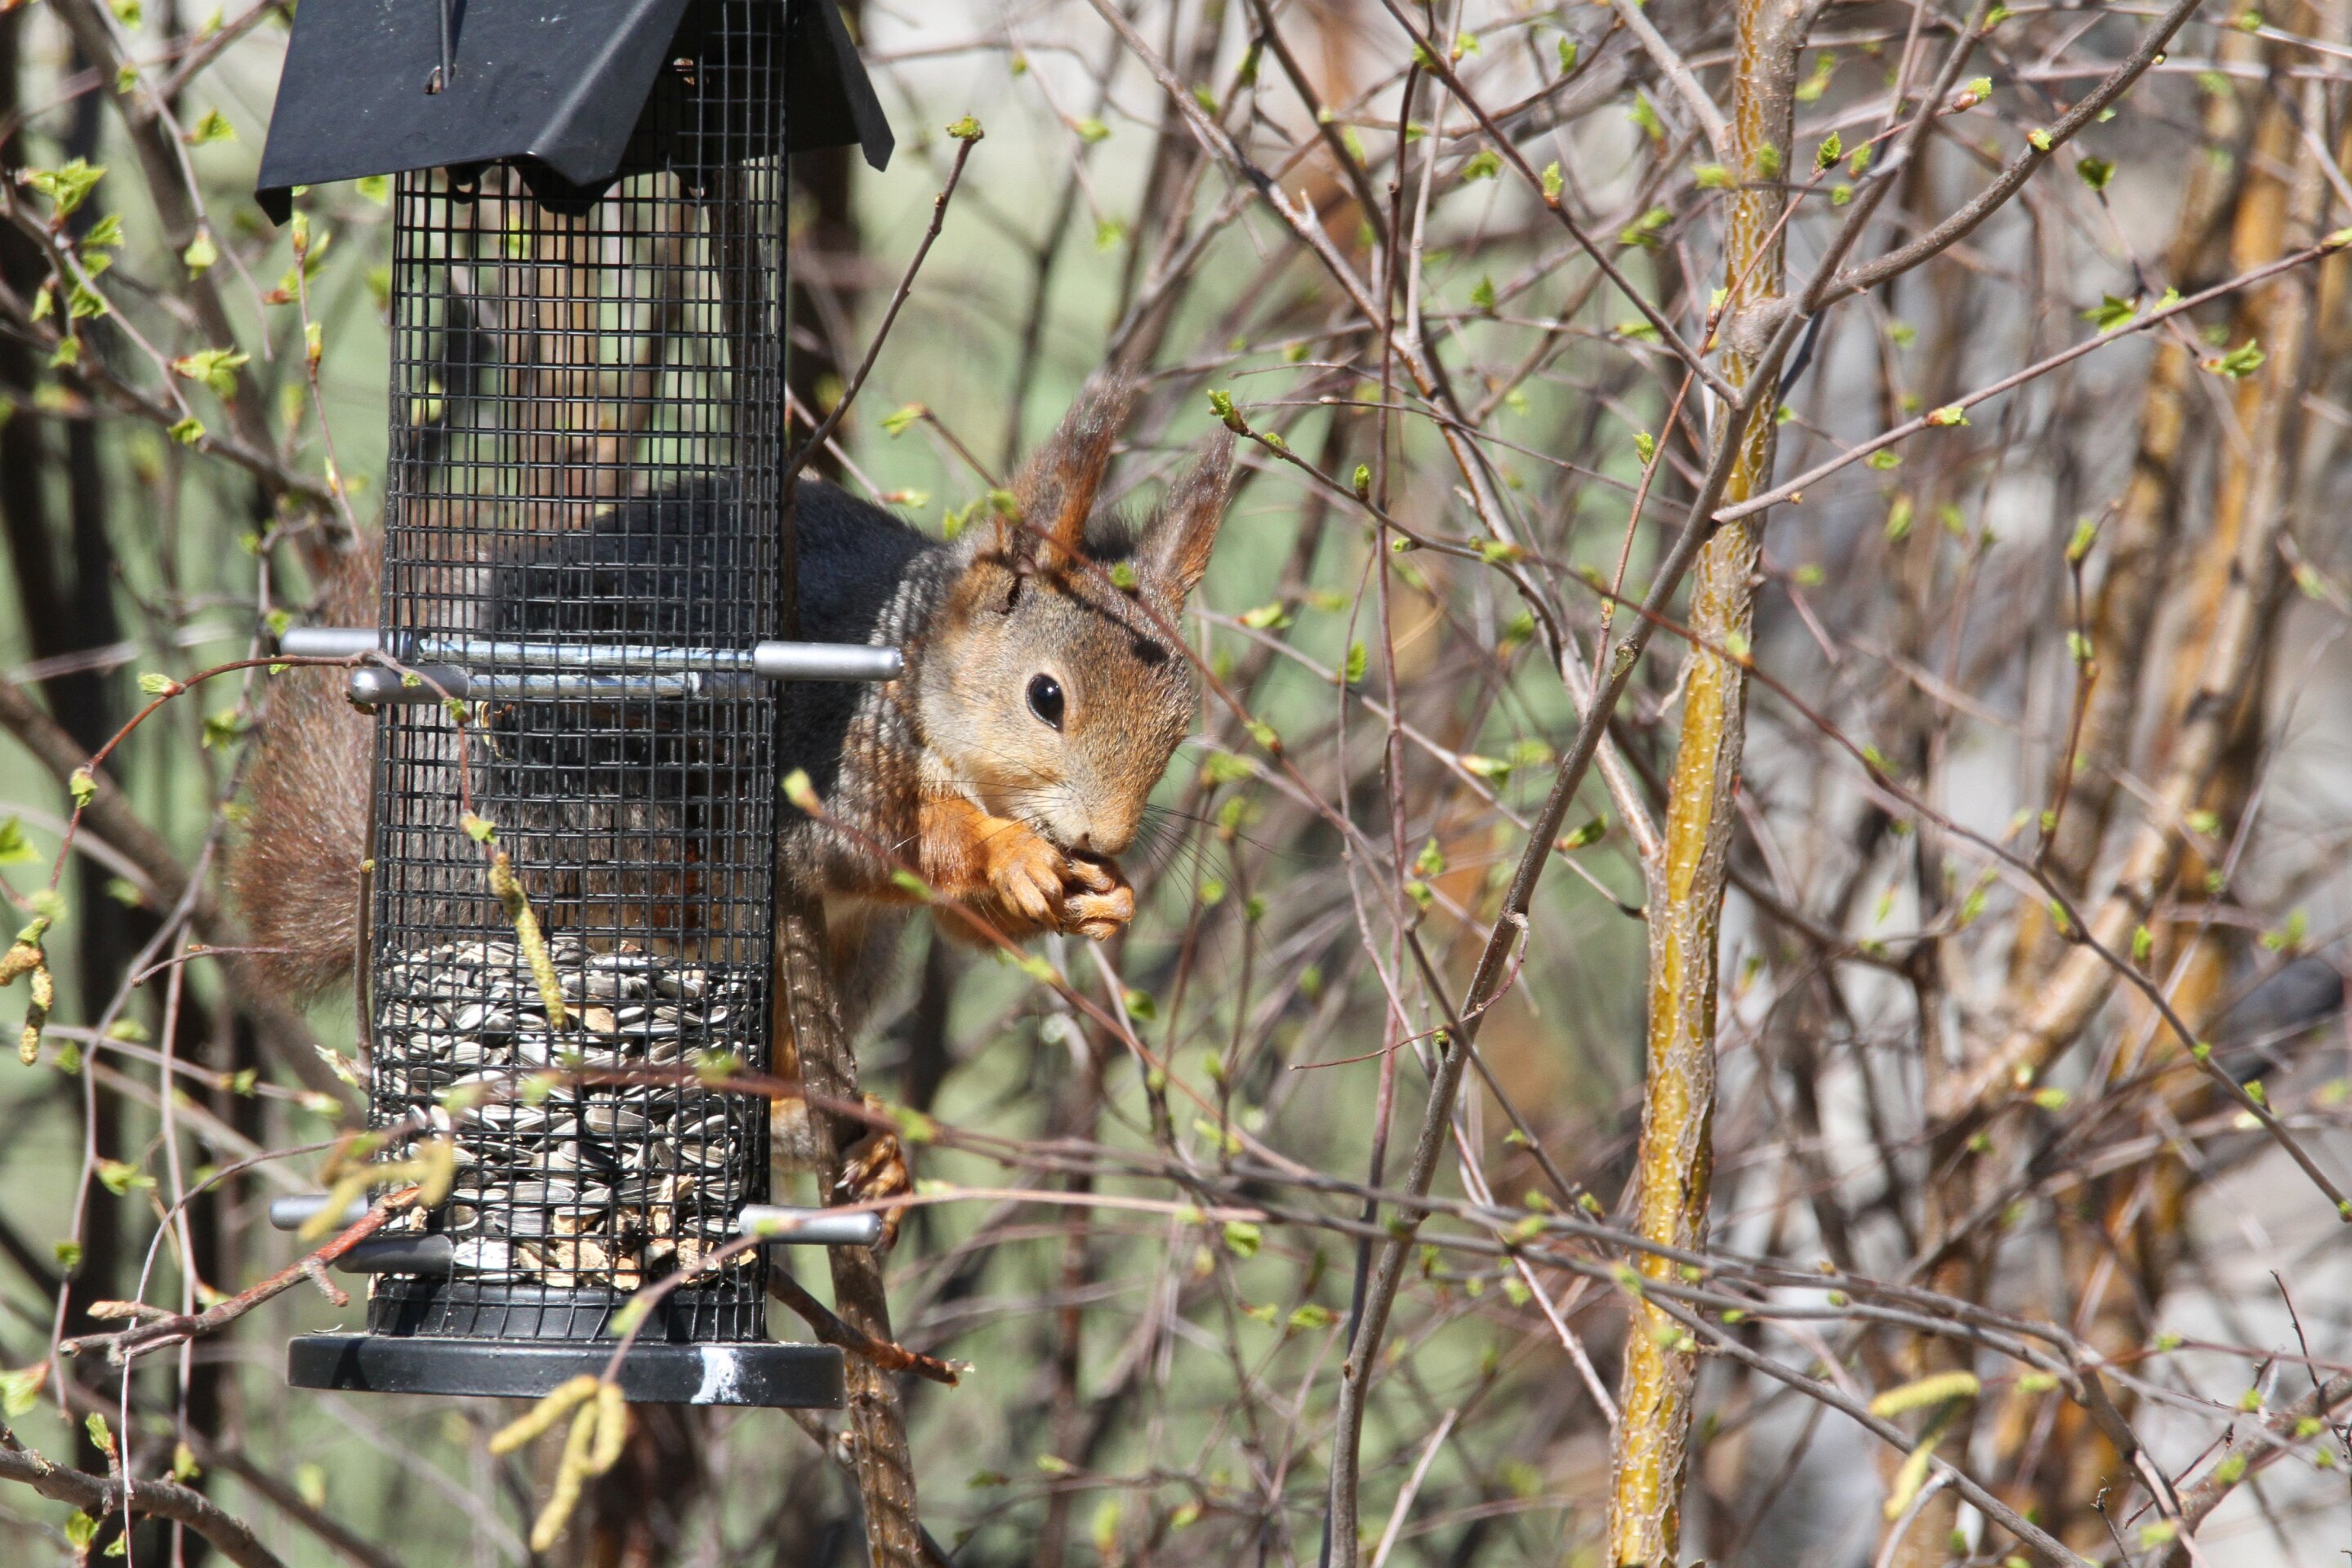 Despite frequent sightings, red squirrel habitats in Berlin are small and fragmented